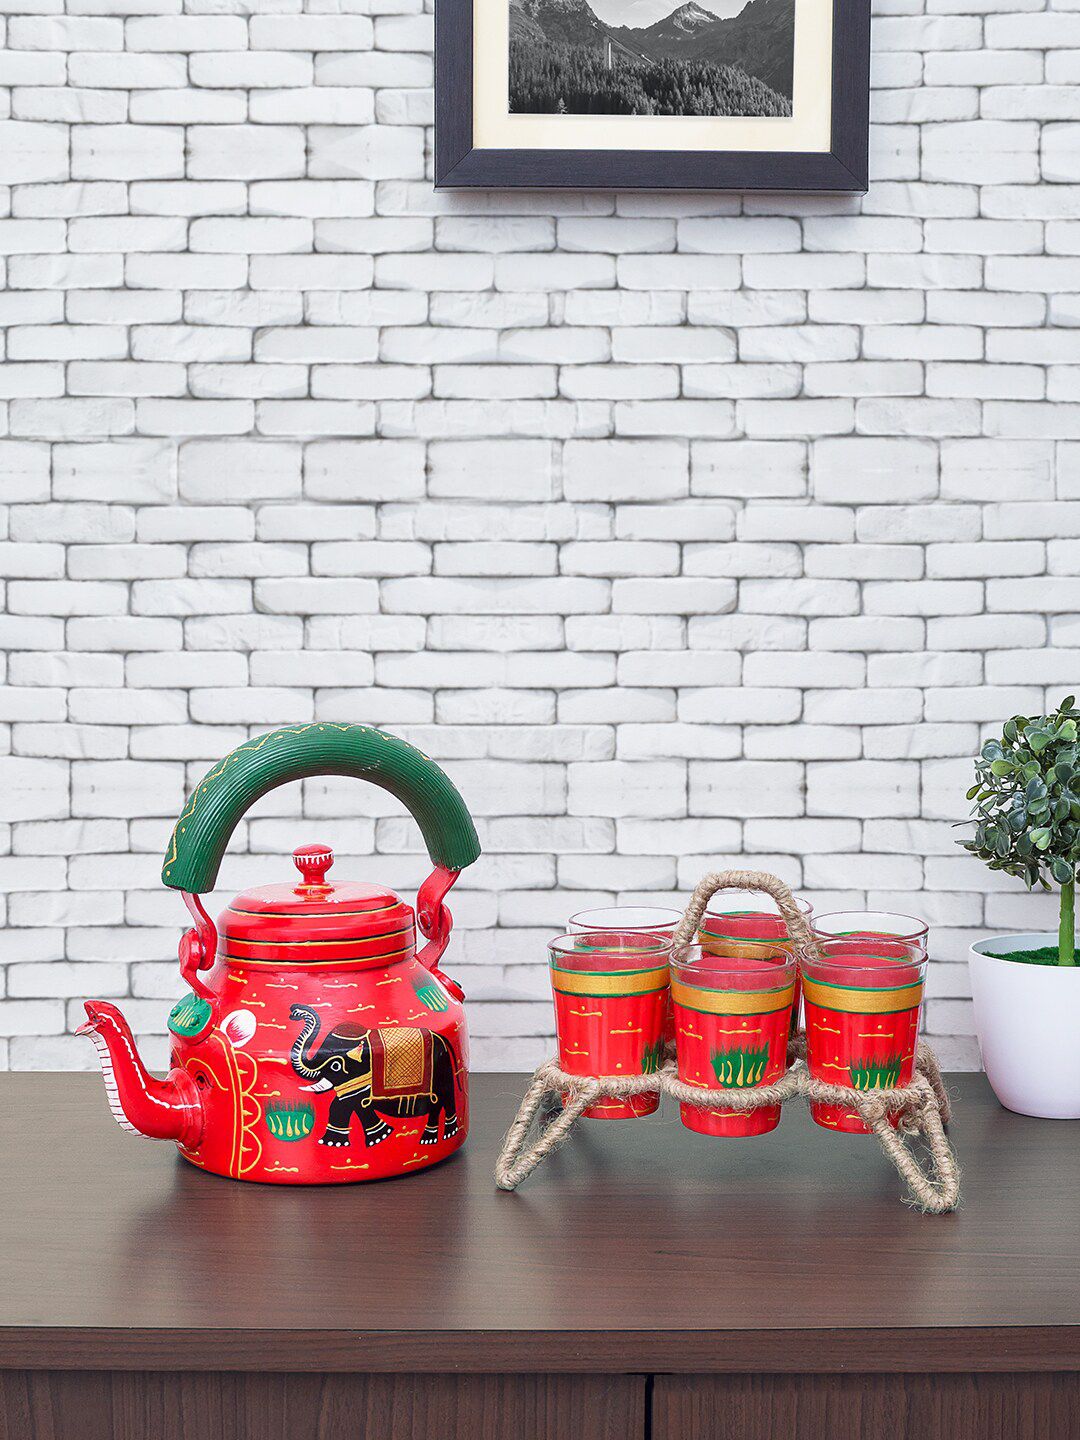 Golden Peacock Red & Green Printed Kettle With 6 Glass Set With Holder Stand Price in India